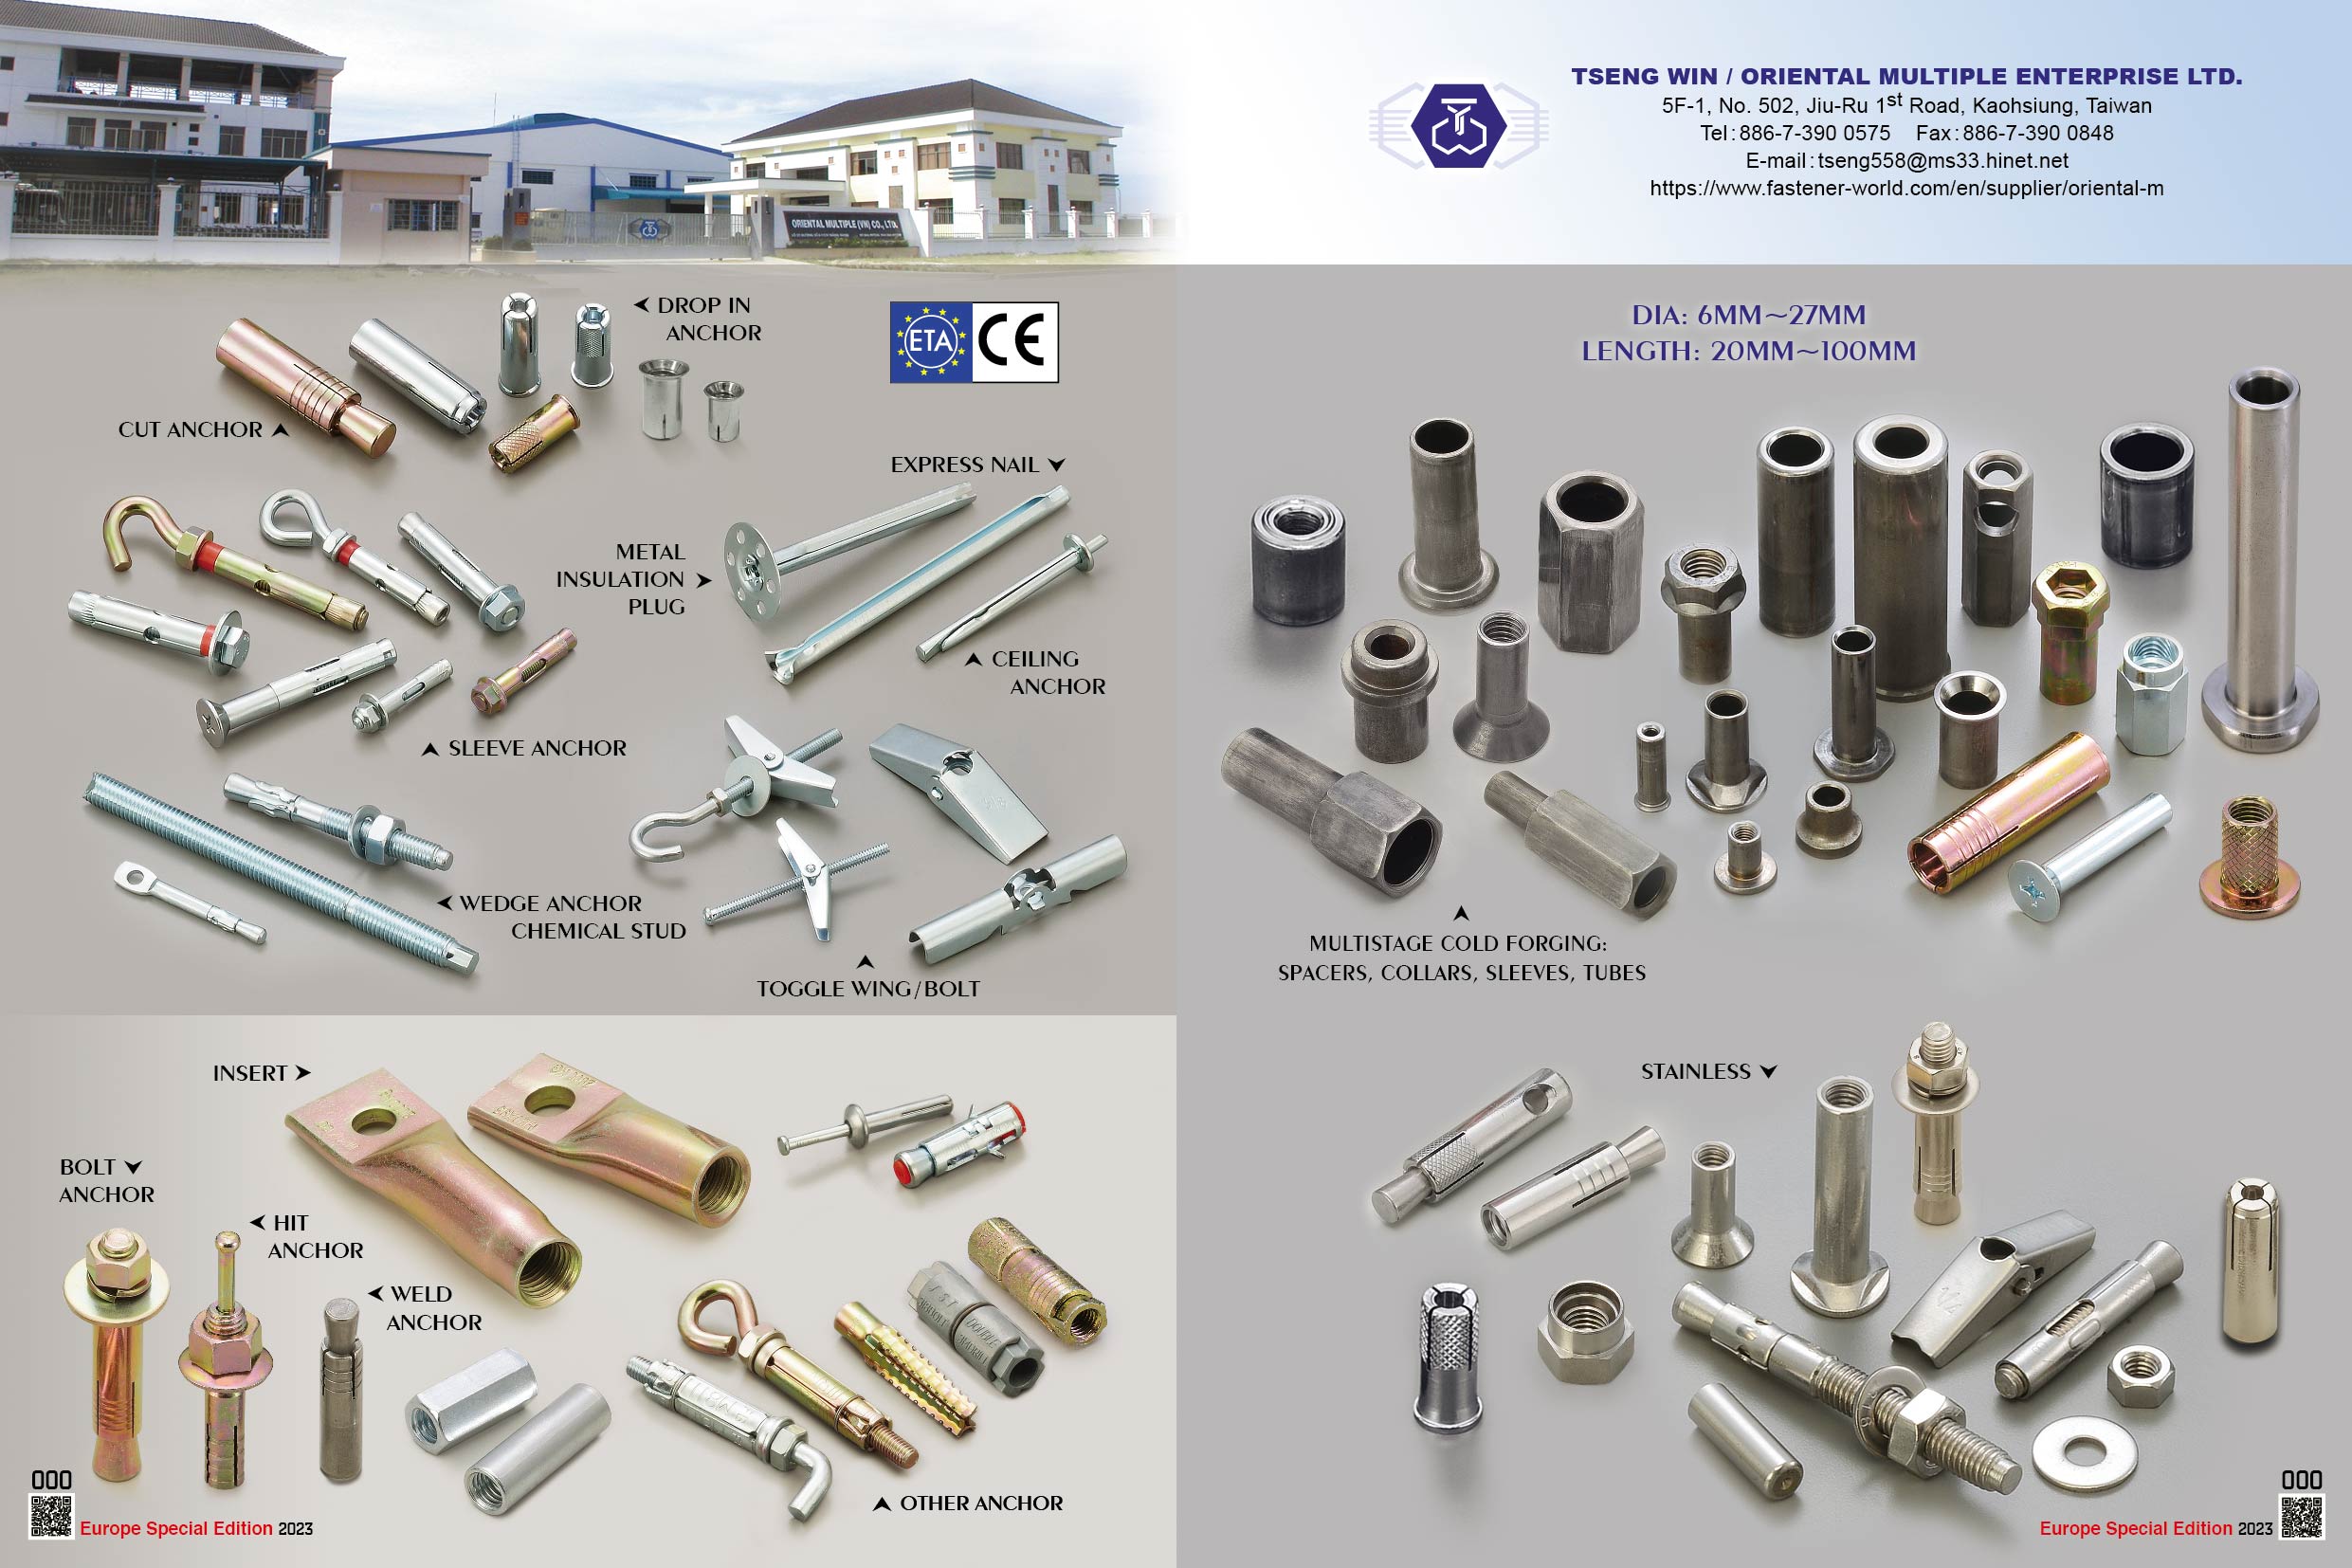 Cut Anchors Cut Anchor, Drop in Anchor, Metal Insulation Plug, Express Nail, Ceiling Anchor, Sleeve Anchor, Wedge Anchor Chemical Stud, Toggle Wing/Bolt, Insert, Bolt Anchor, Hit Anchor, Weld Anchor, Stainless Steel, Multistage cold Forging, Spacers, Collars, Sleeves, Tubes